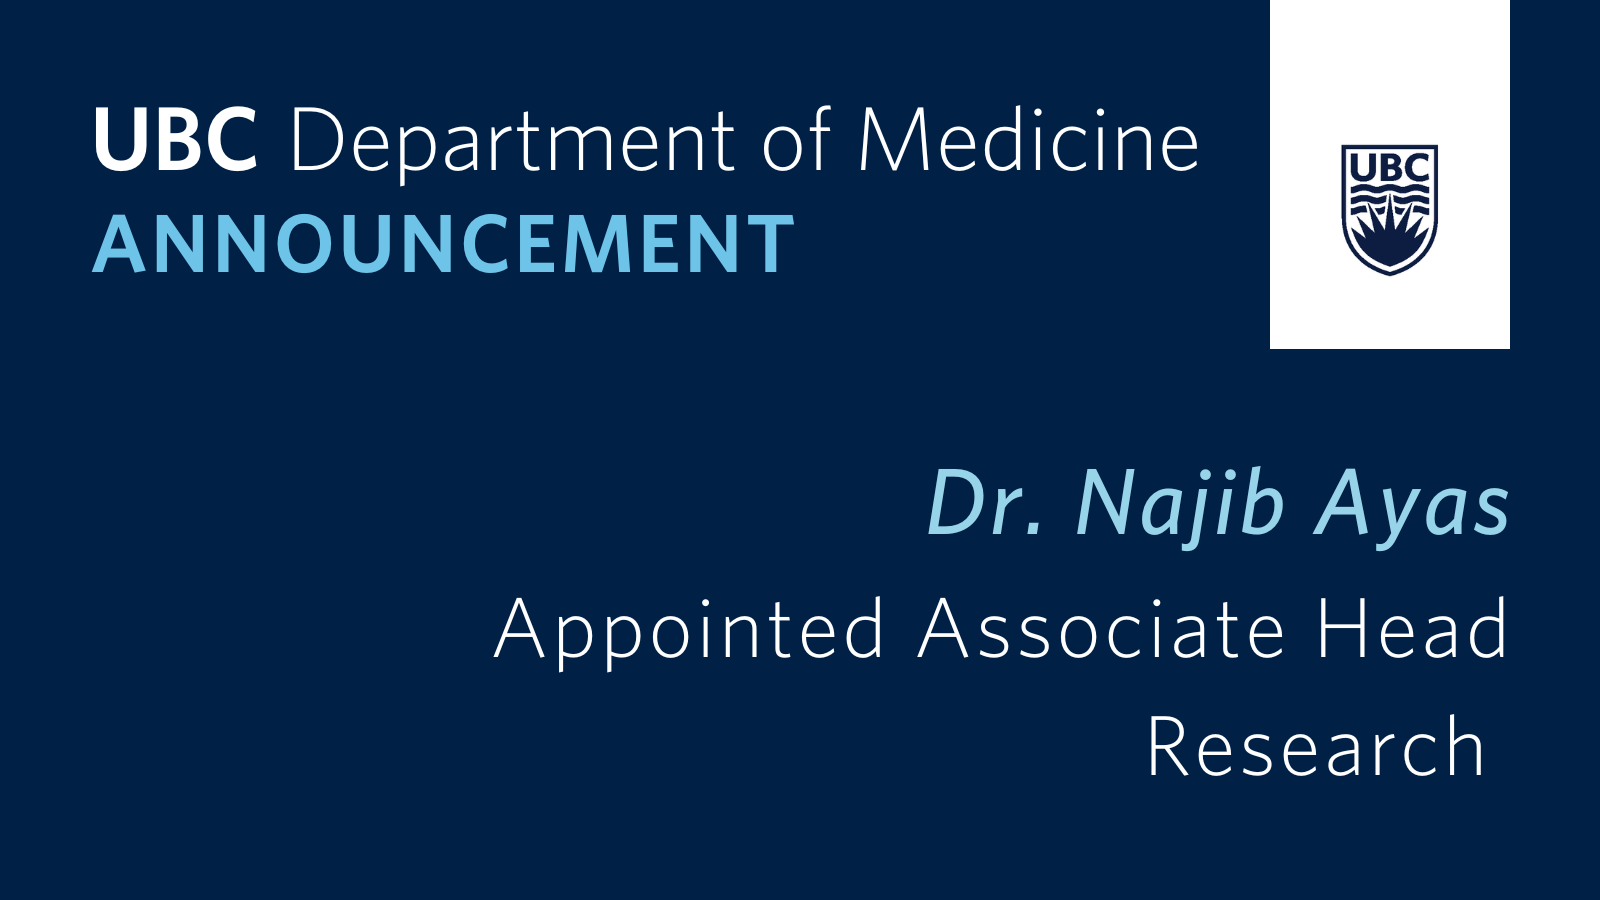 Dr. Najib Ayas appointed as Associate Head, Research